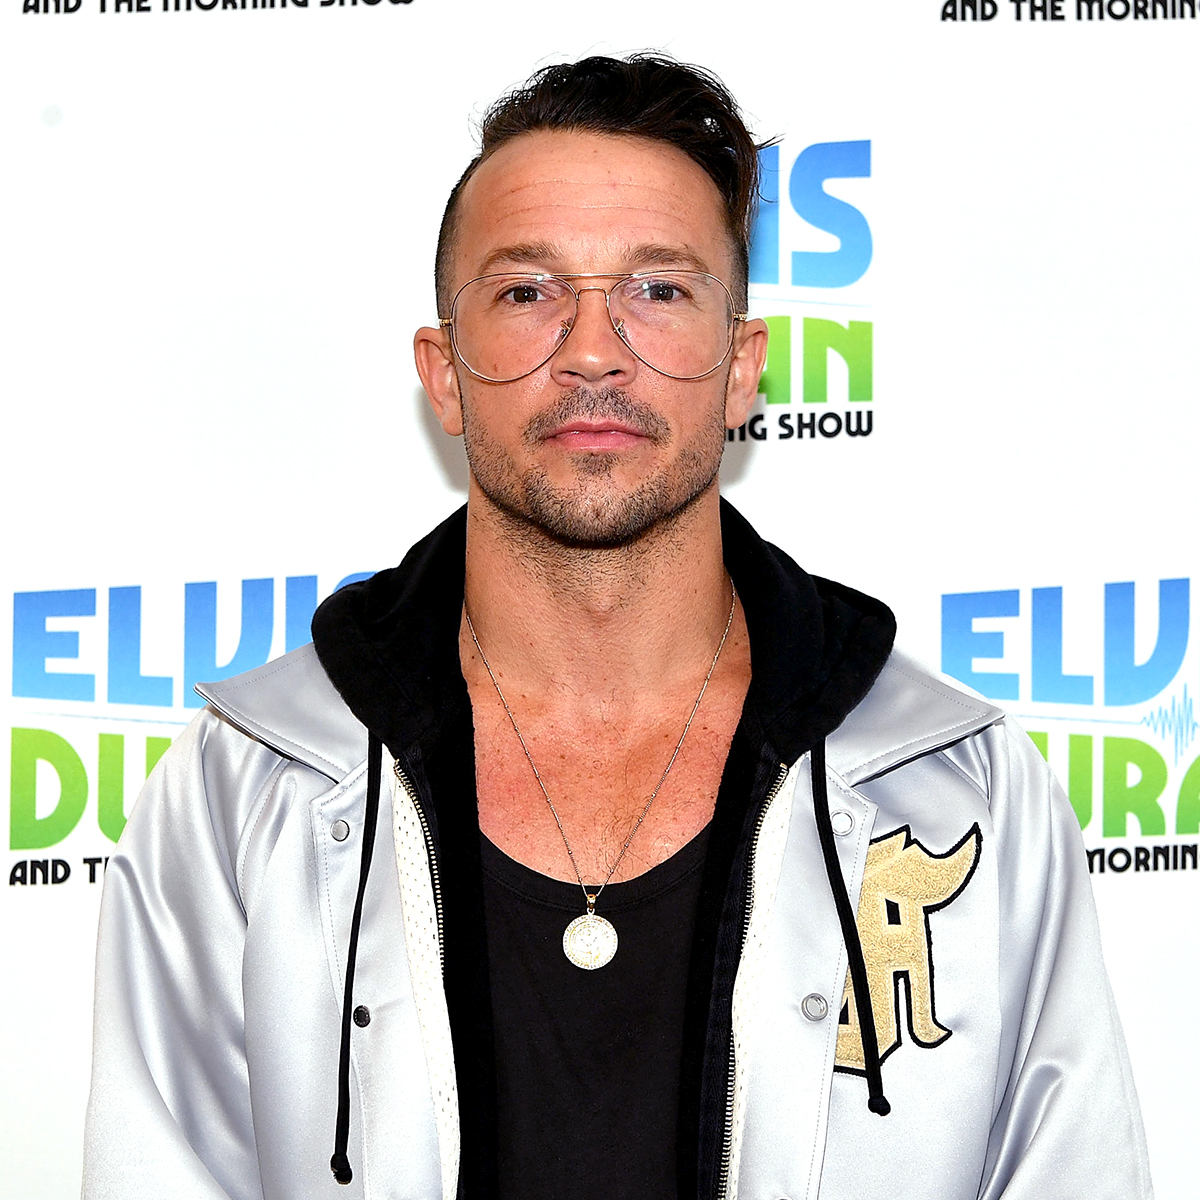 Celeb pastor Carl Lentz, ousted from Hillsong NYC, confesses he